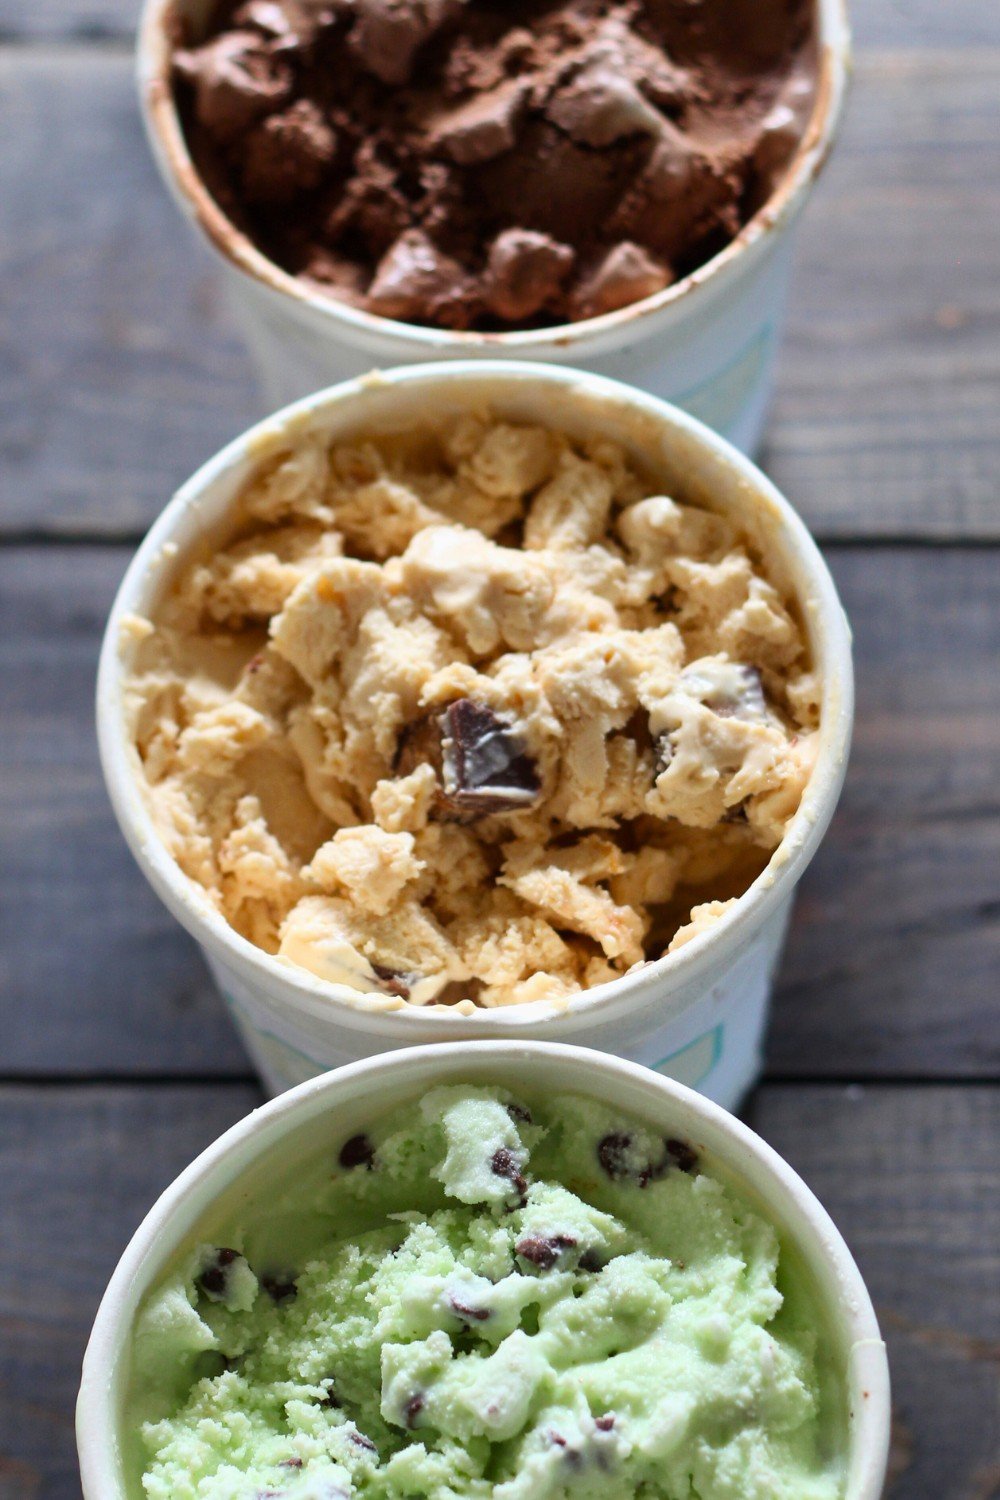 three containers of homemade ice cream - one chocolate, one peanut butter, and one mint chip. Showing you How to Make Ice Cream Without an Ice Cream Machine.